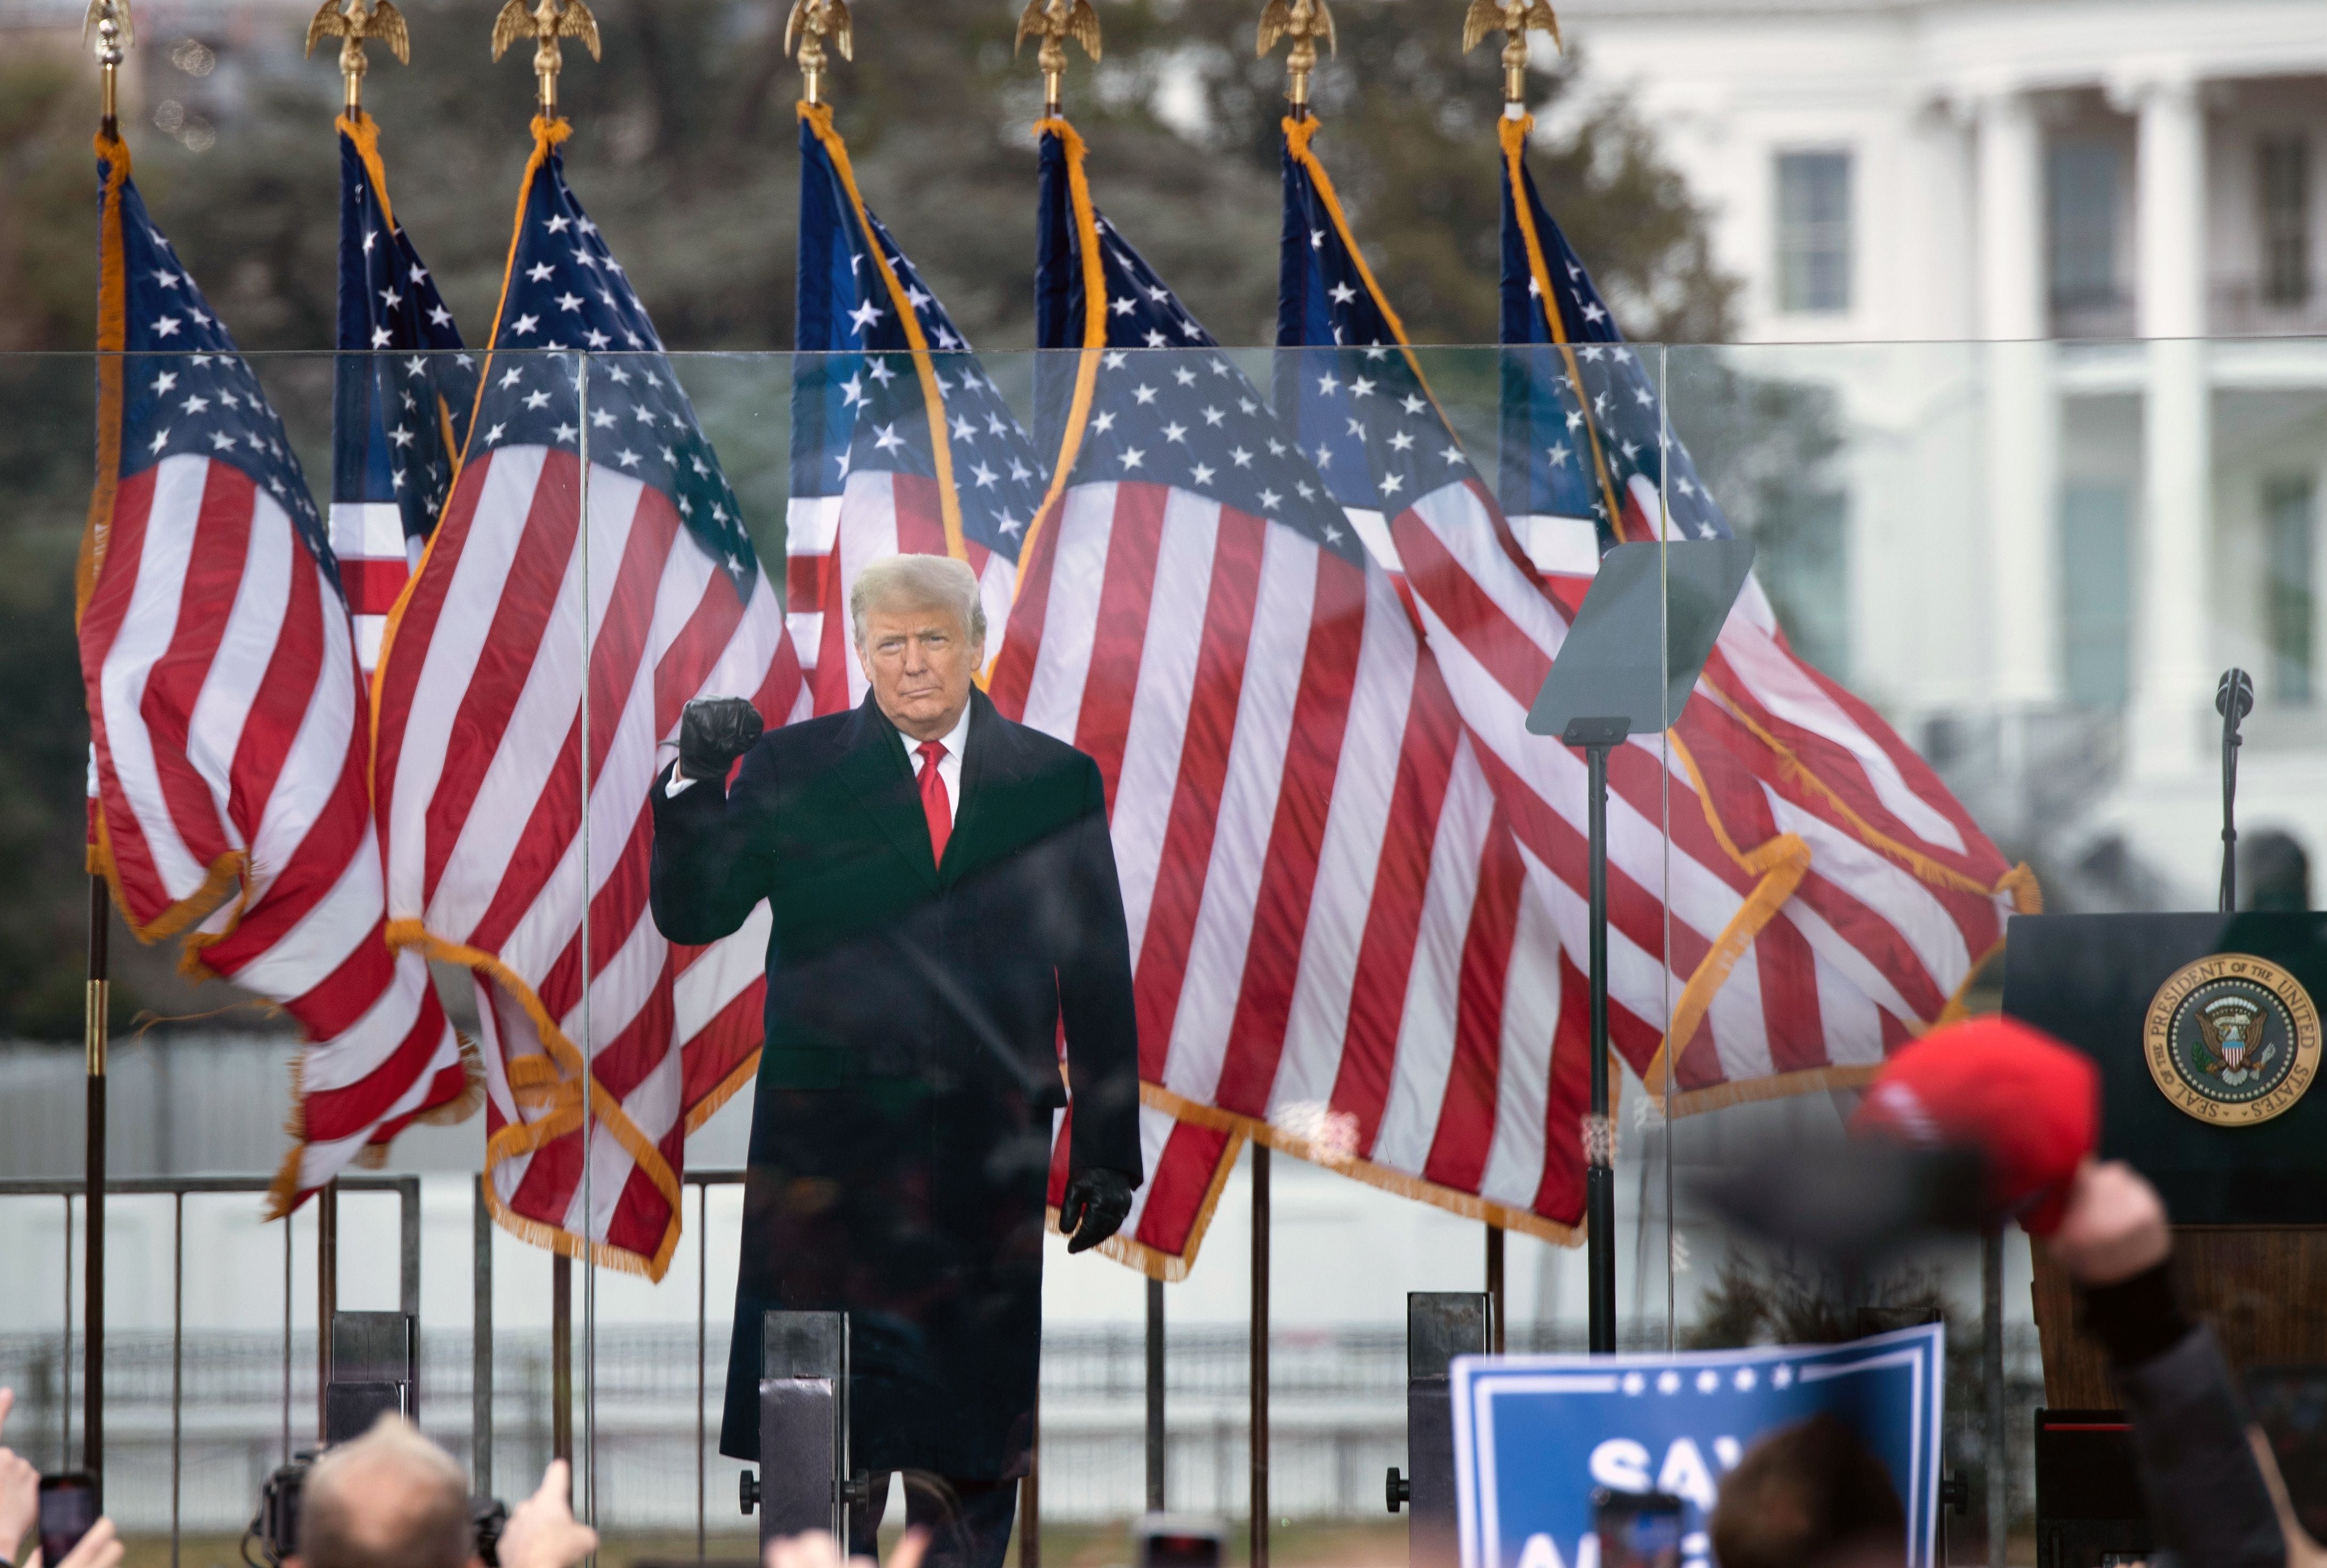 Donald Trump speaks to supporters from The Ellipse near the White House on January 6, 2021, in Washington, DC.